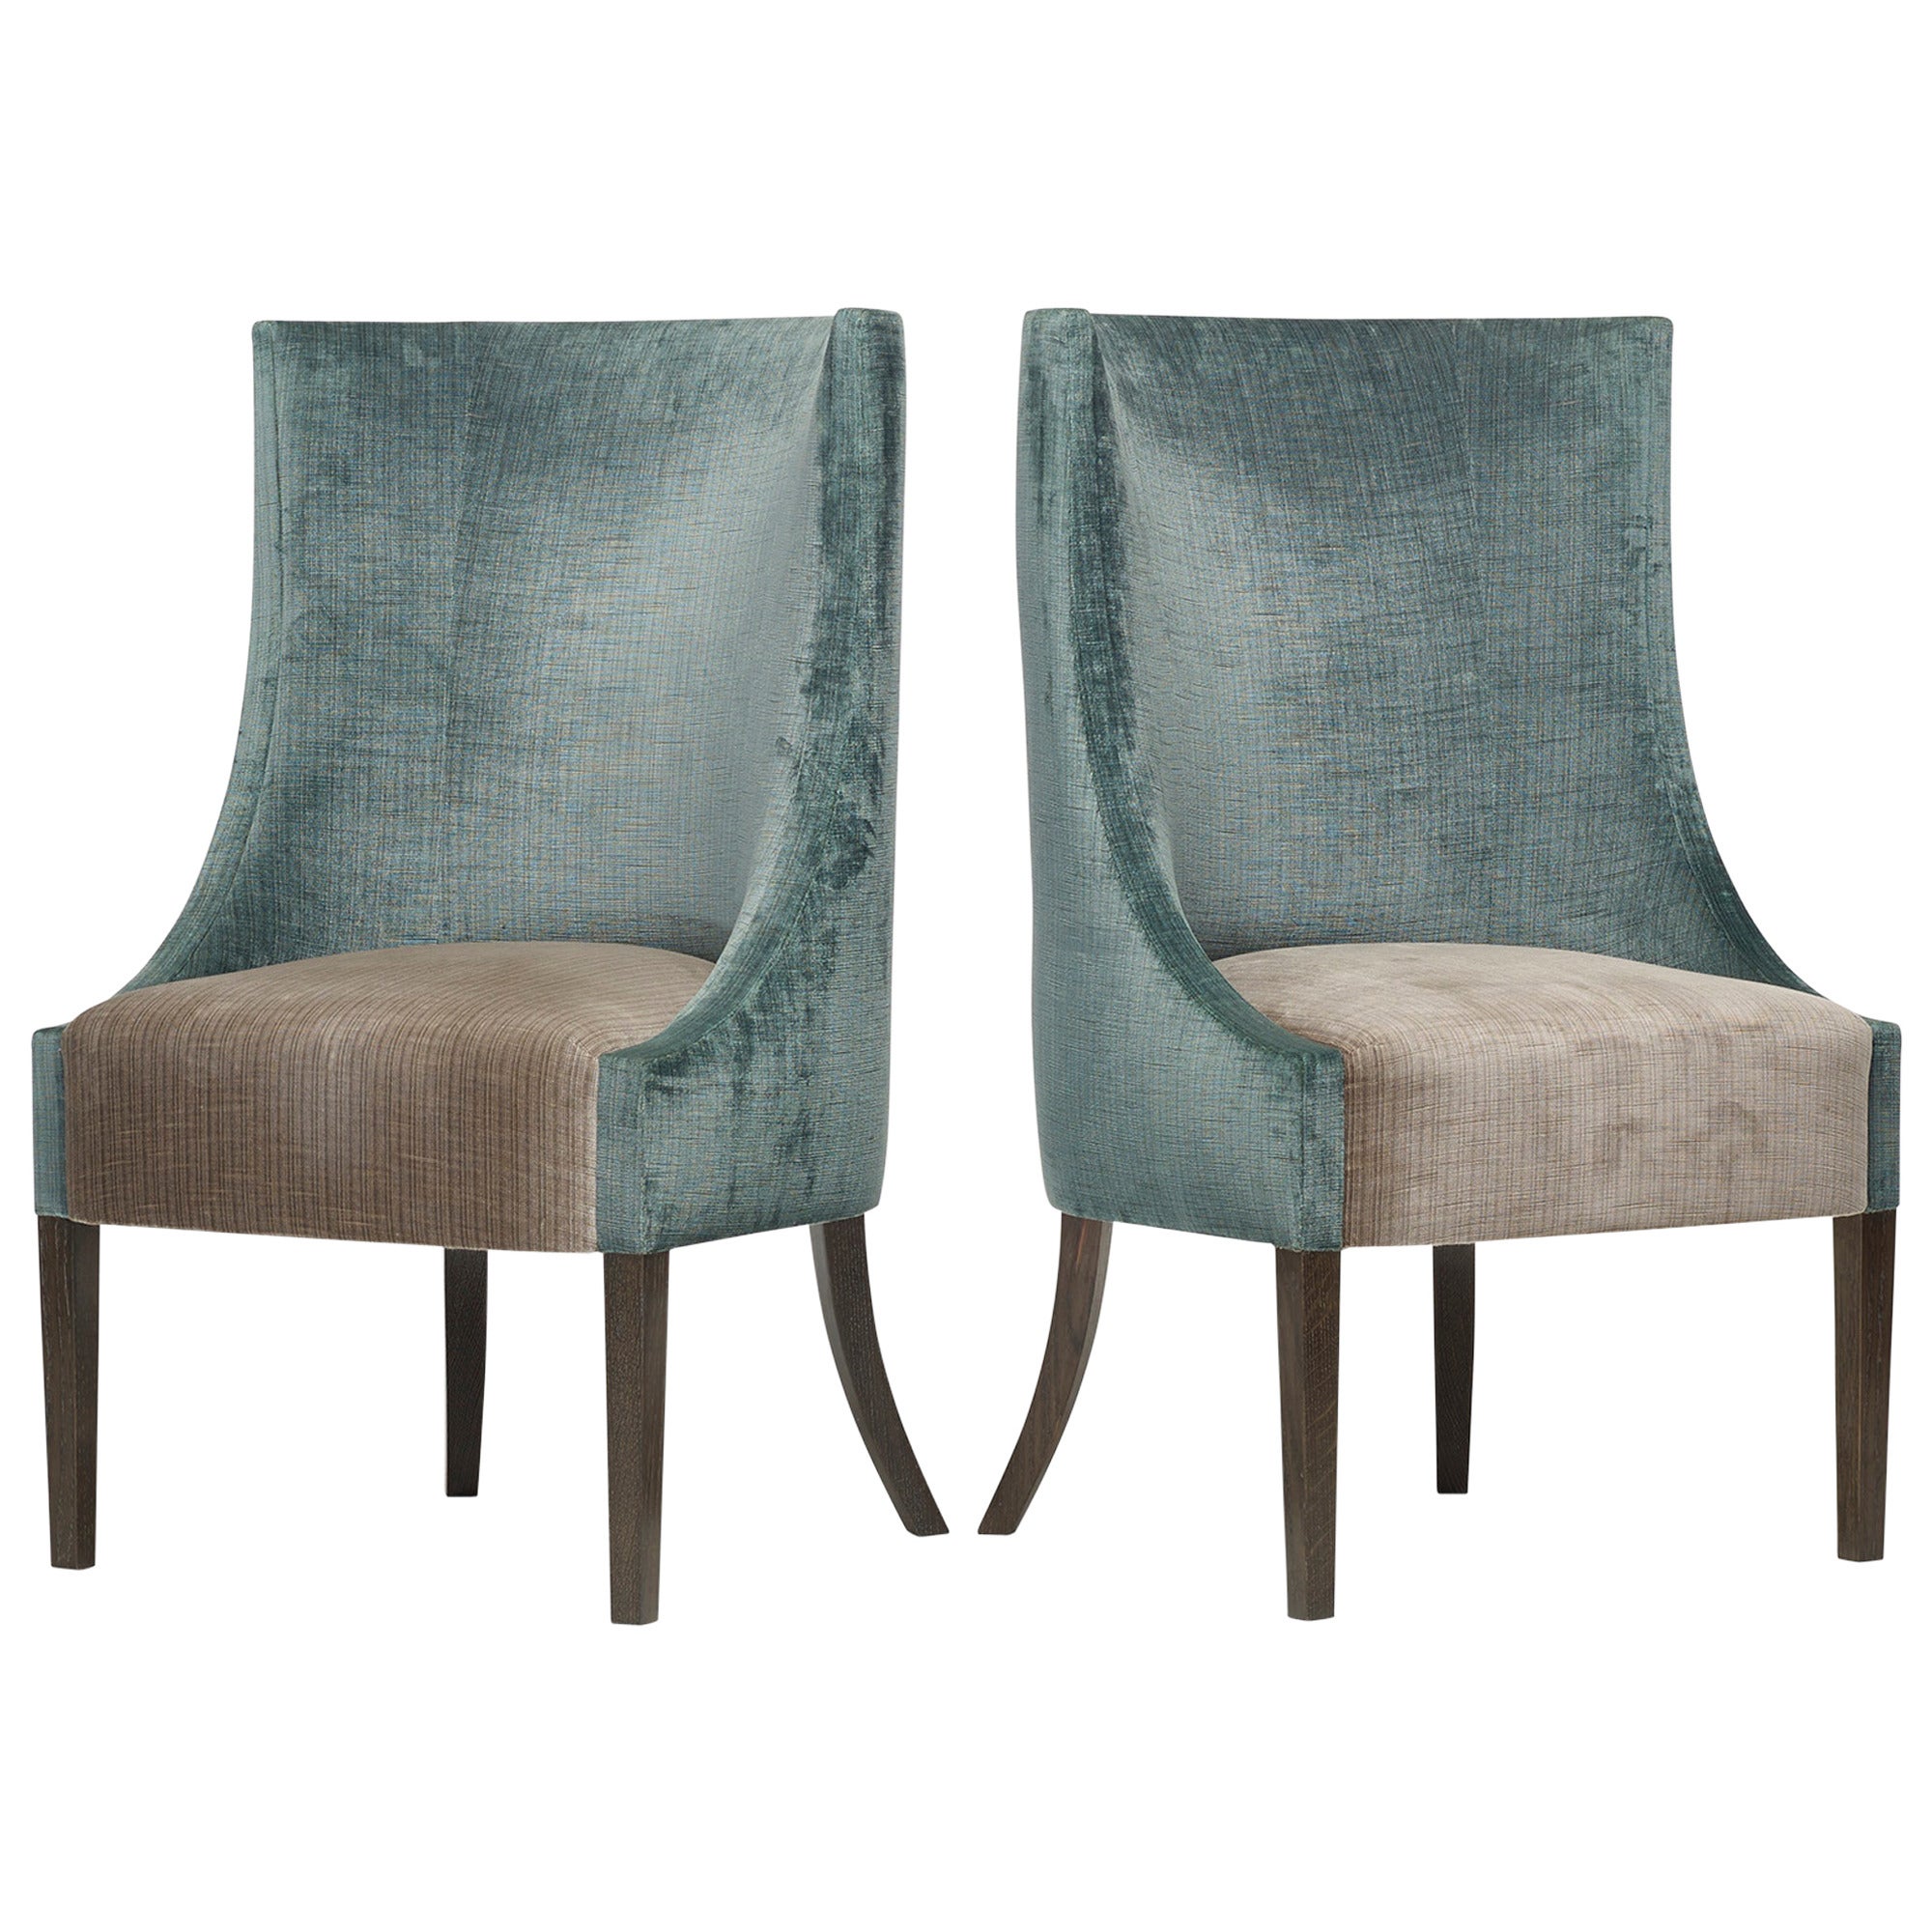 La Gondola Chairs, Pair by Chahan Minassian For Sale